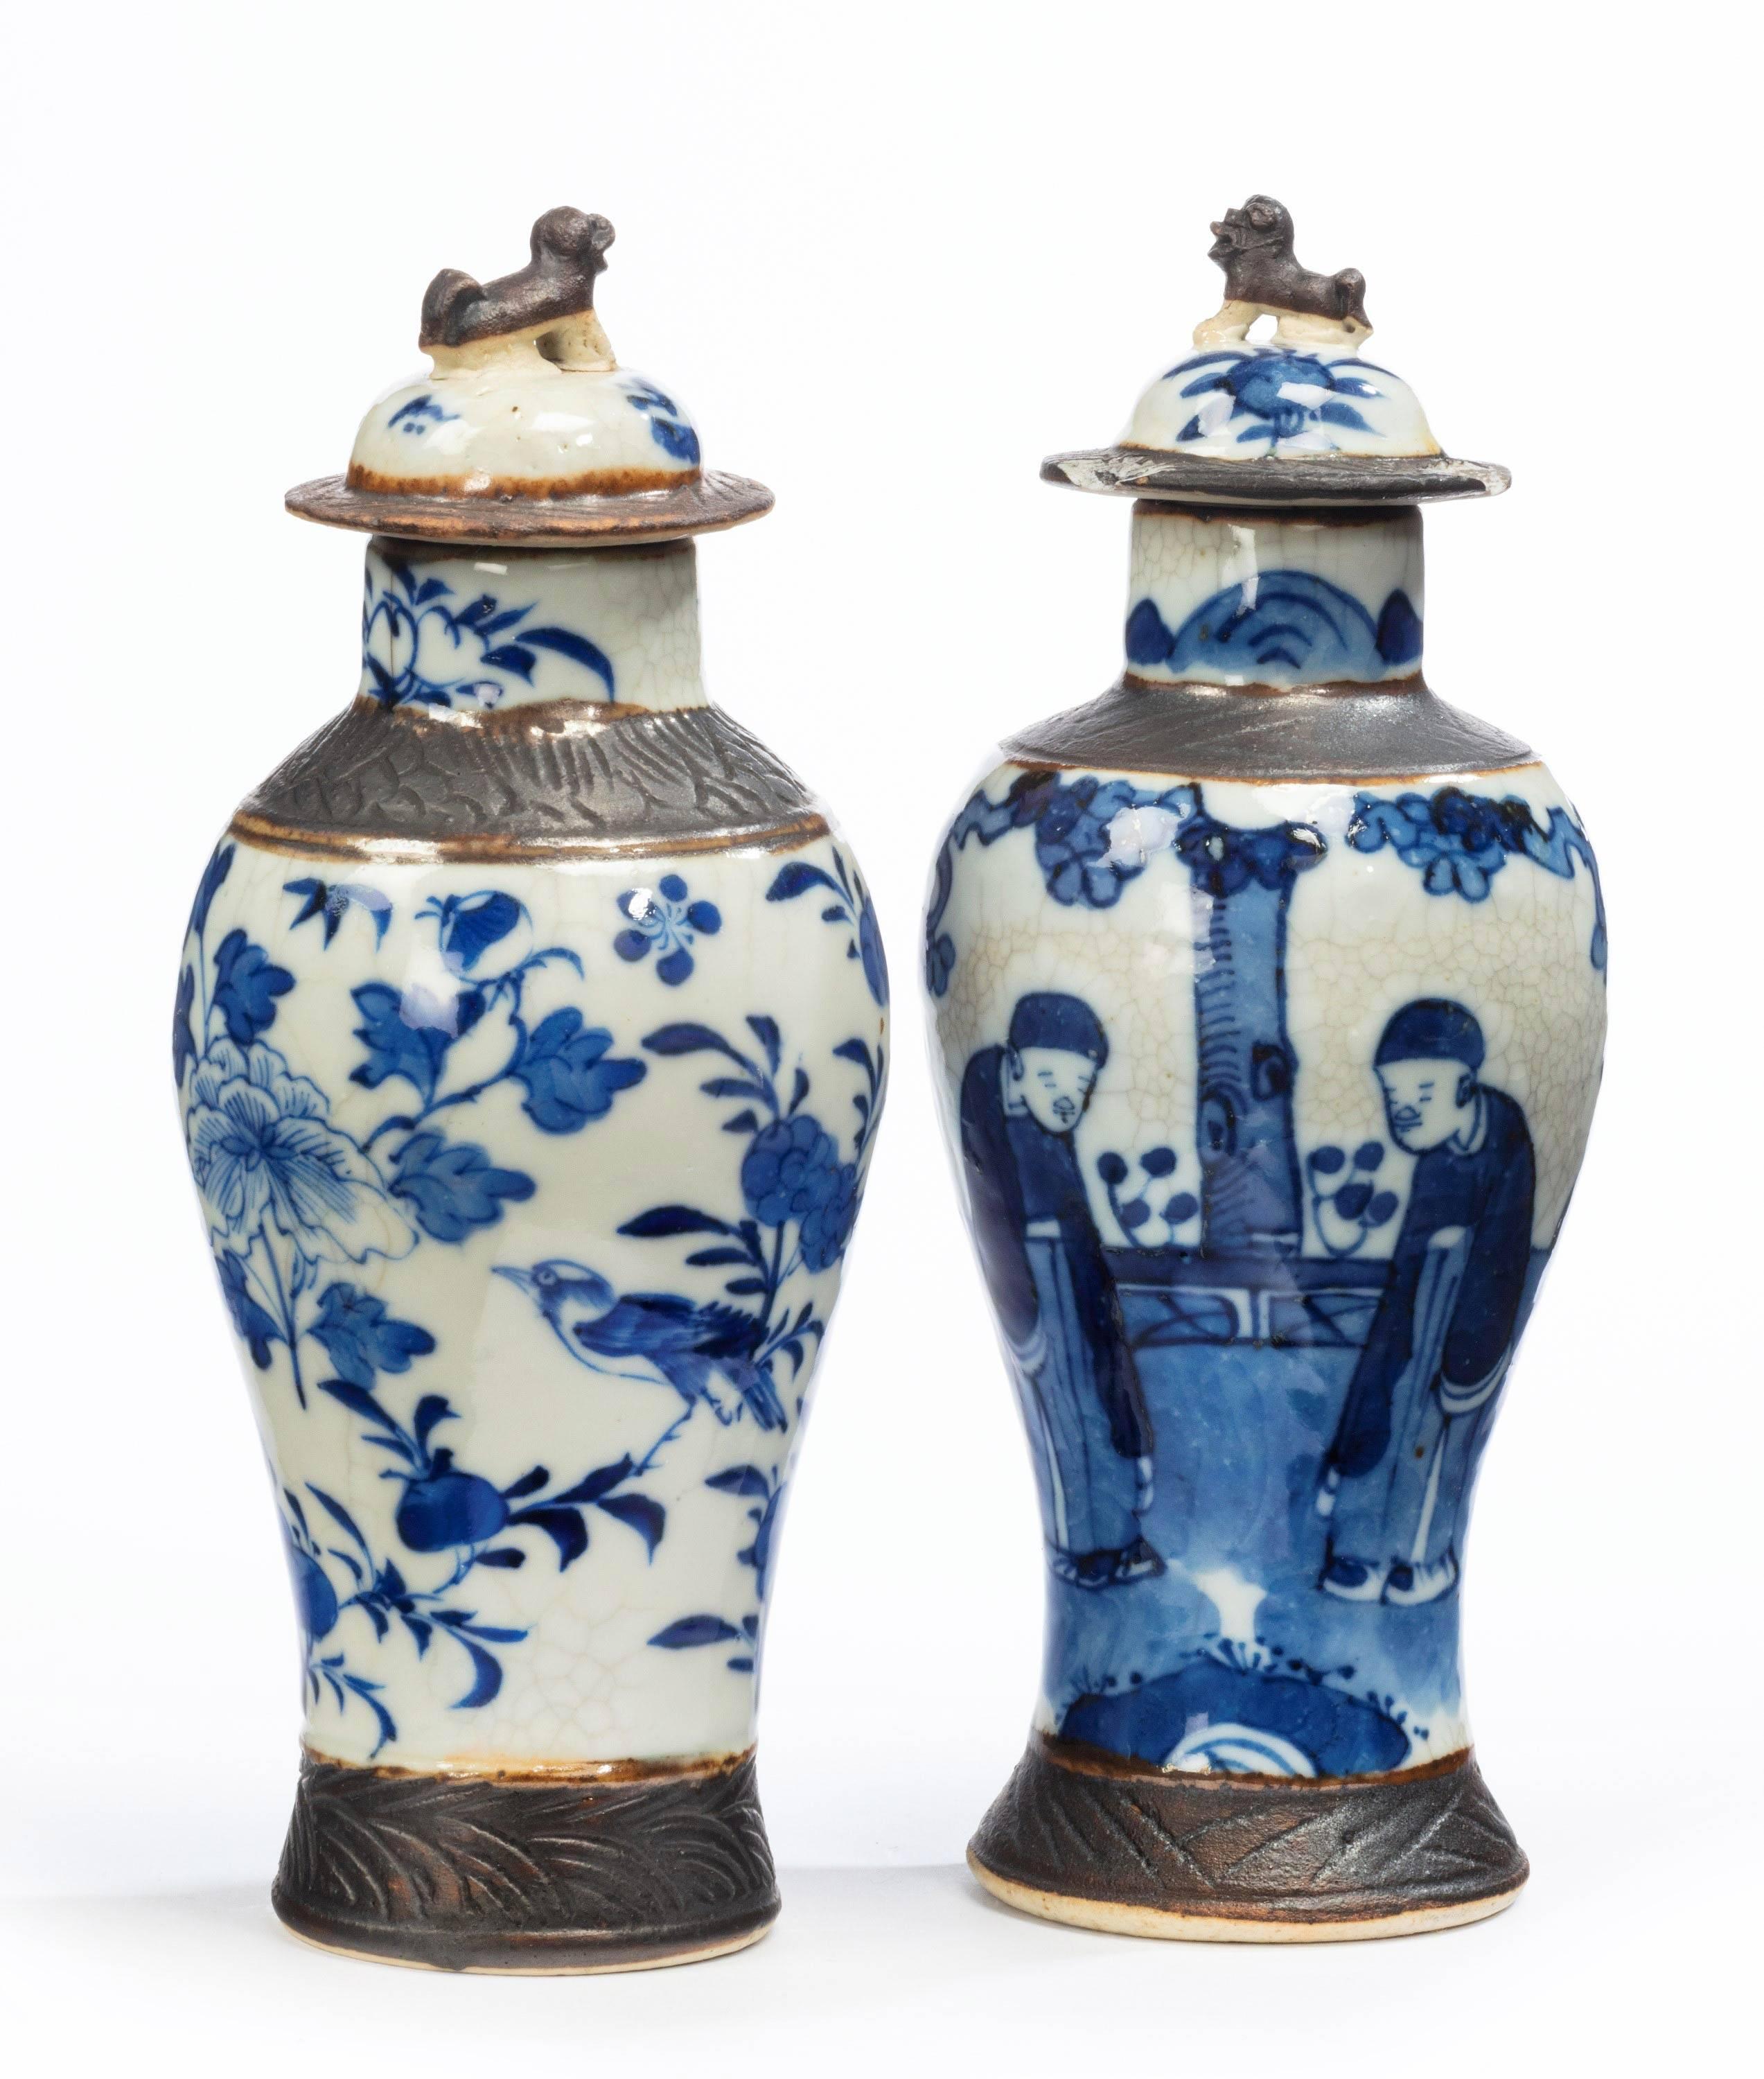 Porcelain Pair of Late 19th Century Chinese Crackleware Vases